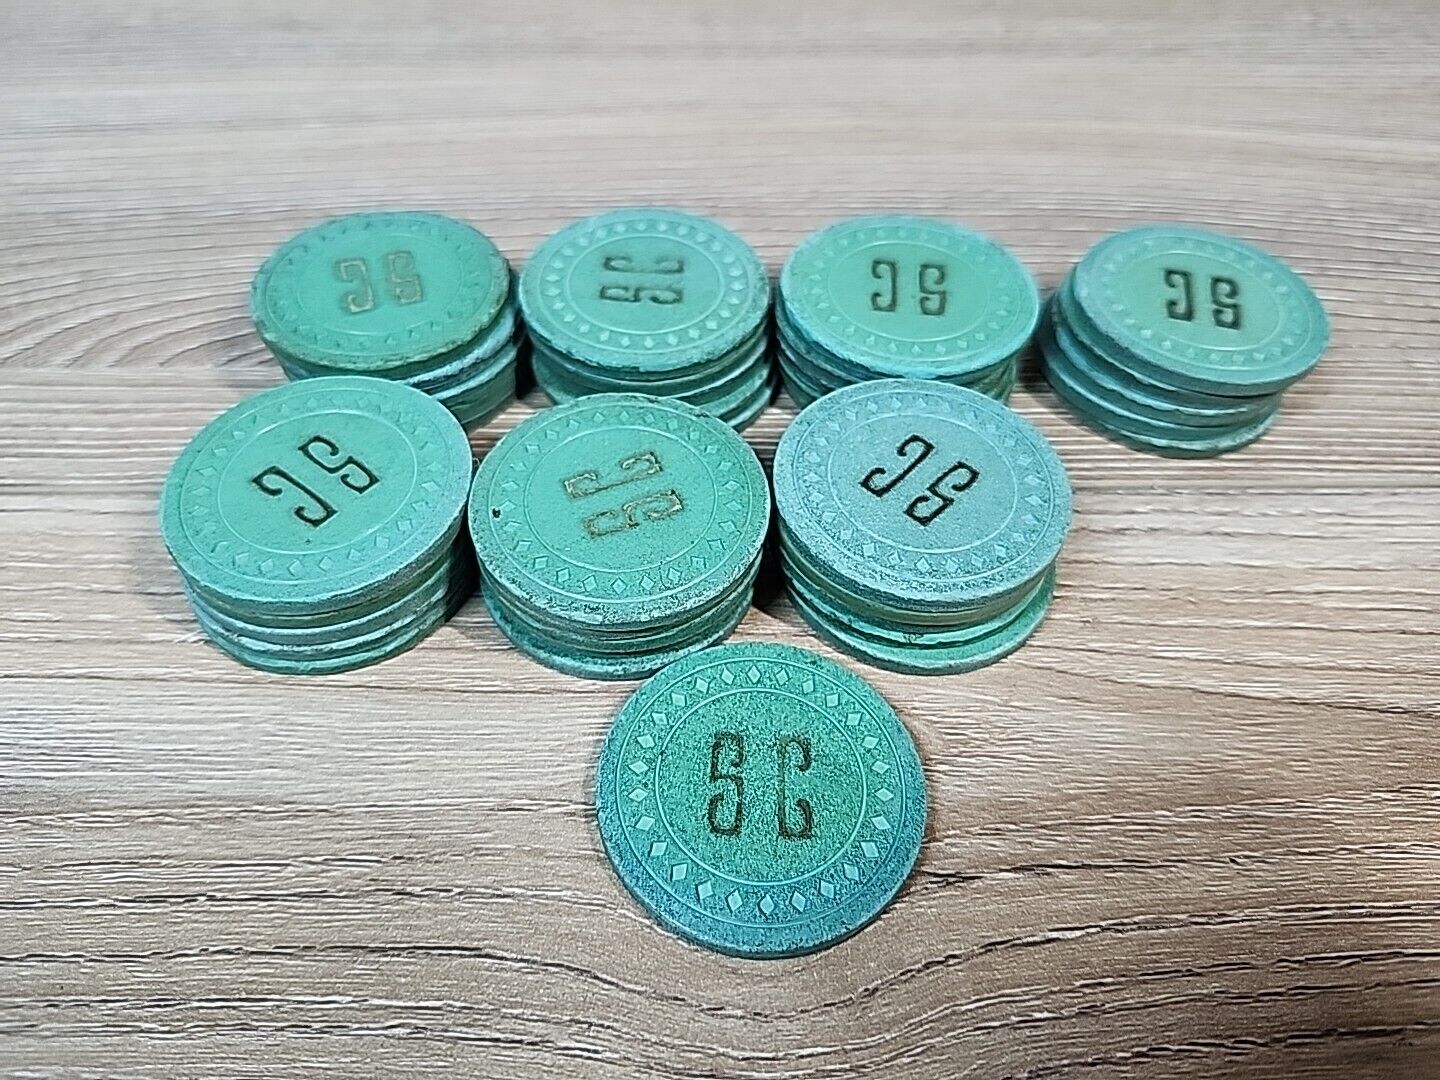 Vintage ILLEGAL SC UNKNOWN Green Diamond Stamped 35 POKER CHIPS Jack Todd Co